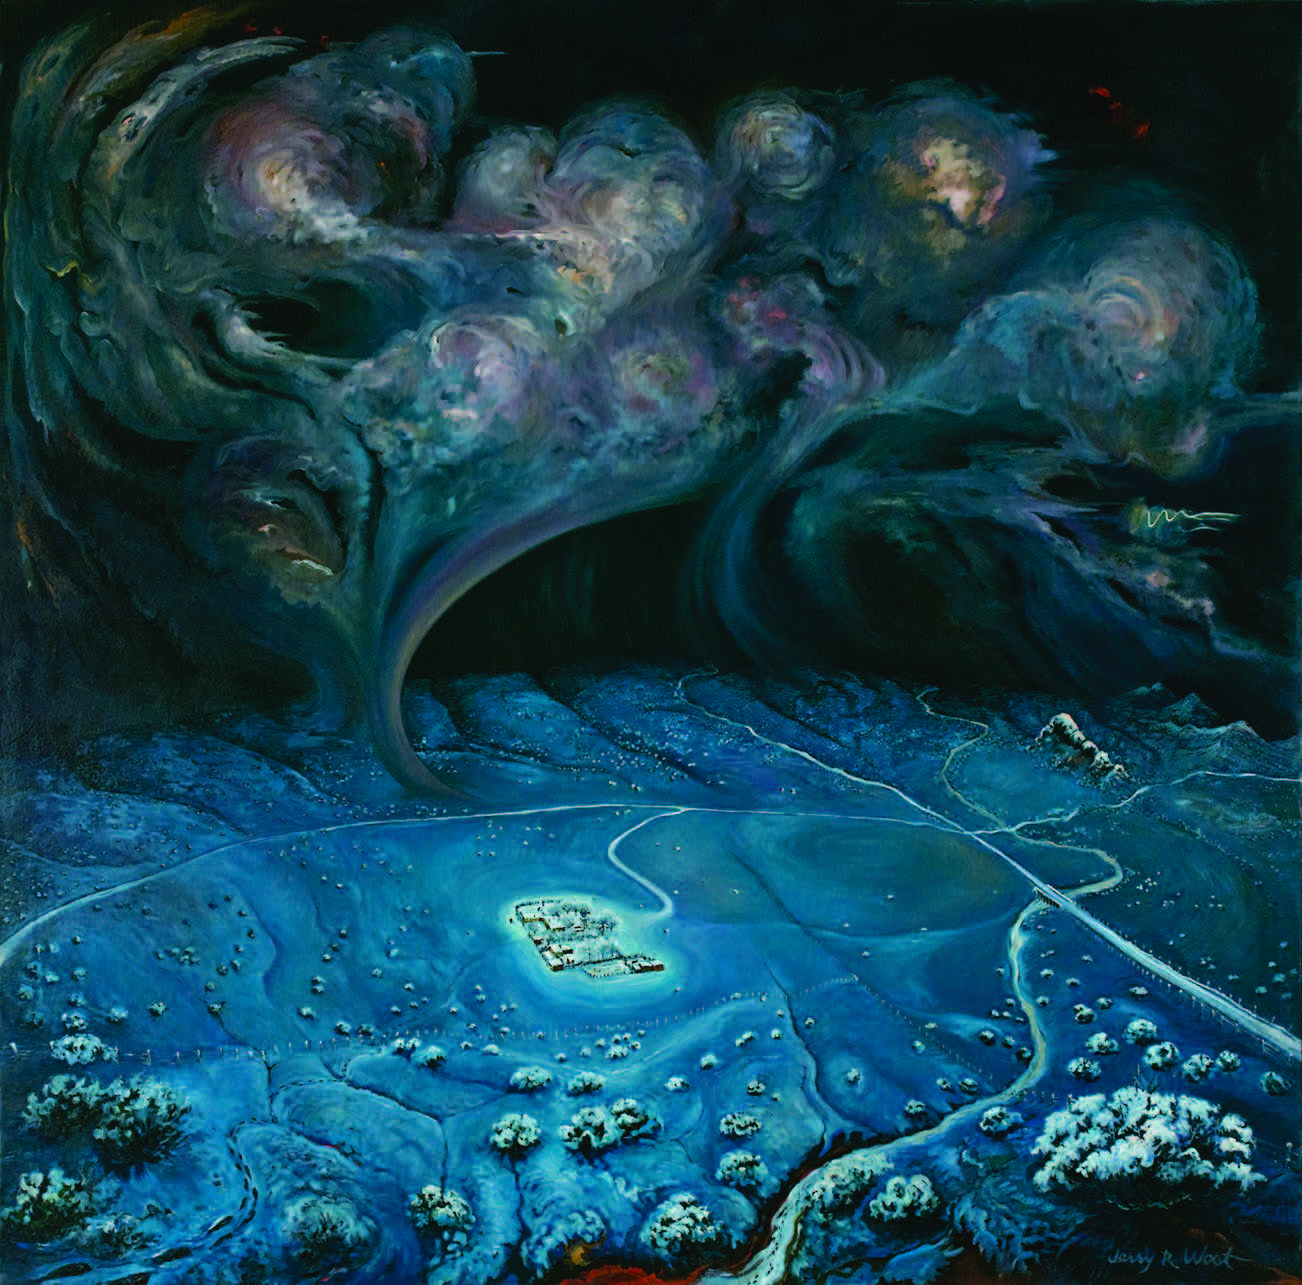 Jerry West, Prairie Winter with Approaching Cosmic Storm, 1989. Oil on canvas, 71 × 75 in. Collection of the New Mexico Museum of Art. Gift of Ray Graham, 1991 (1991.54.1).